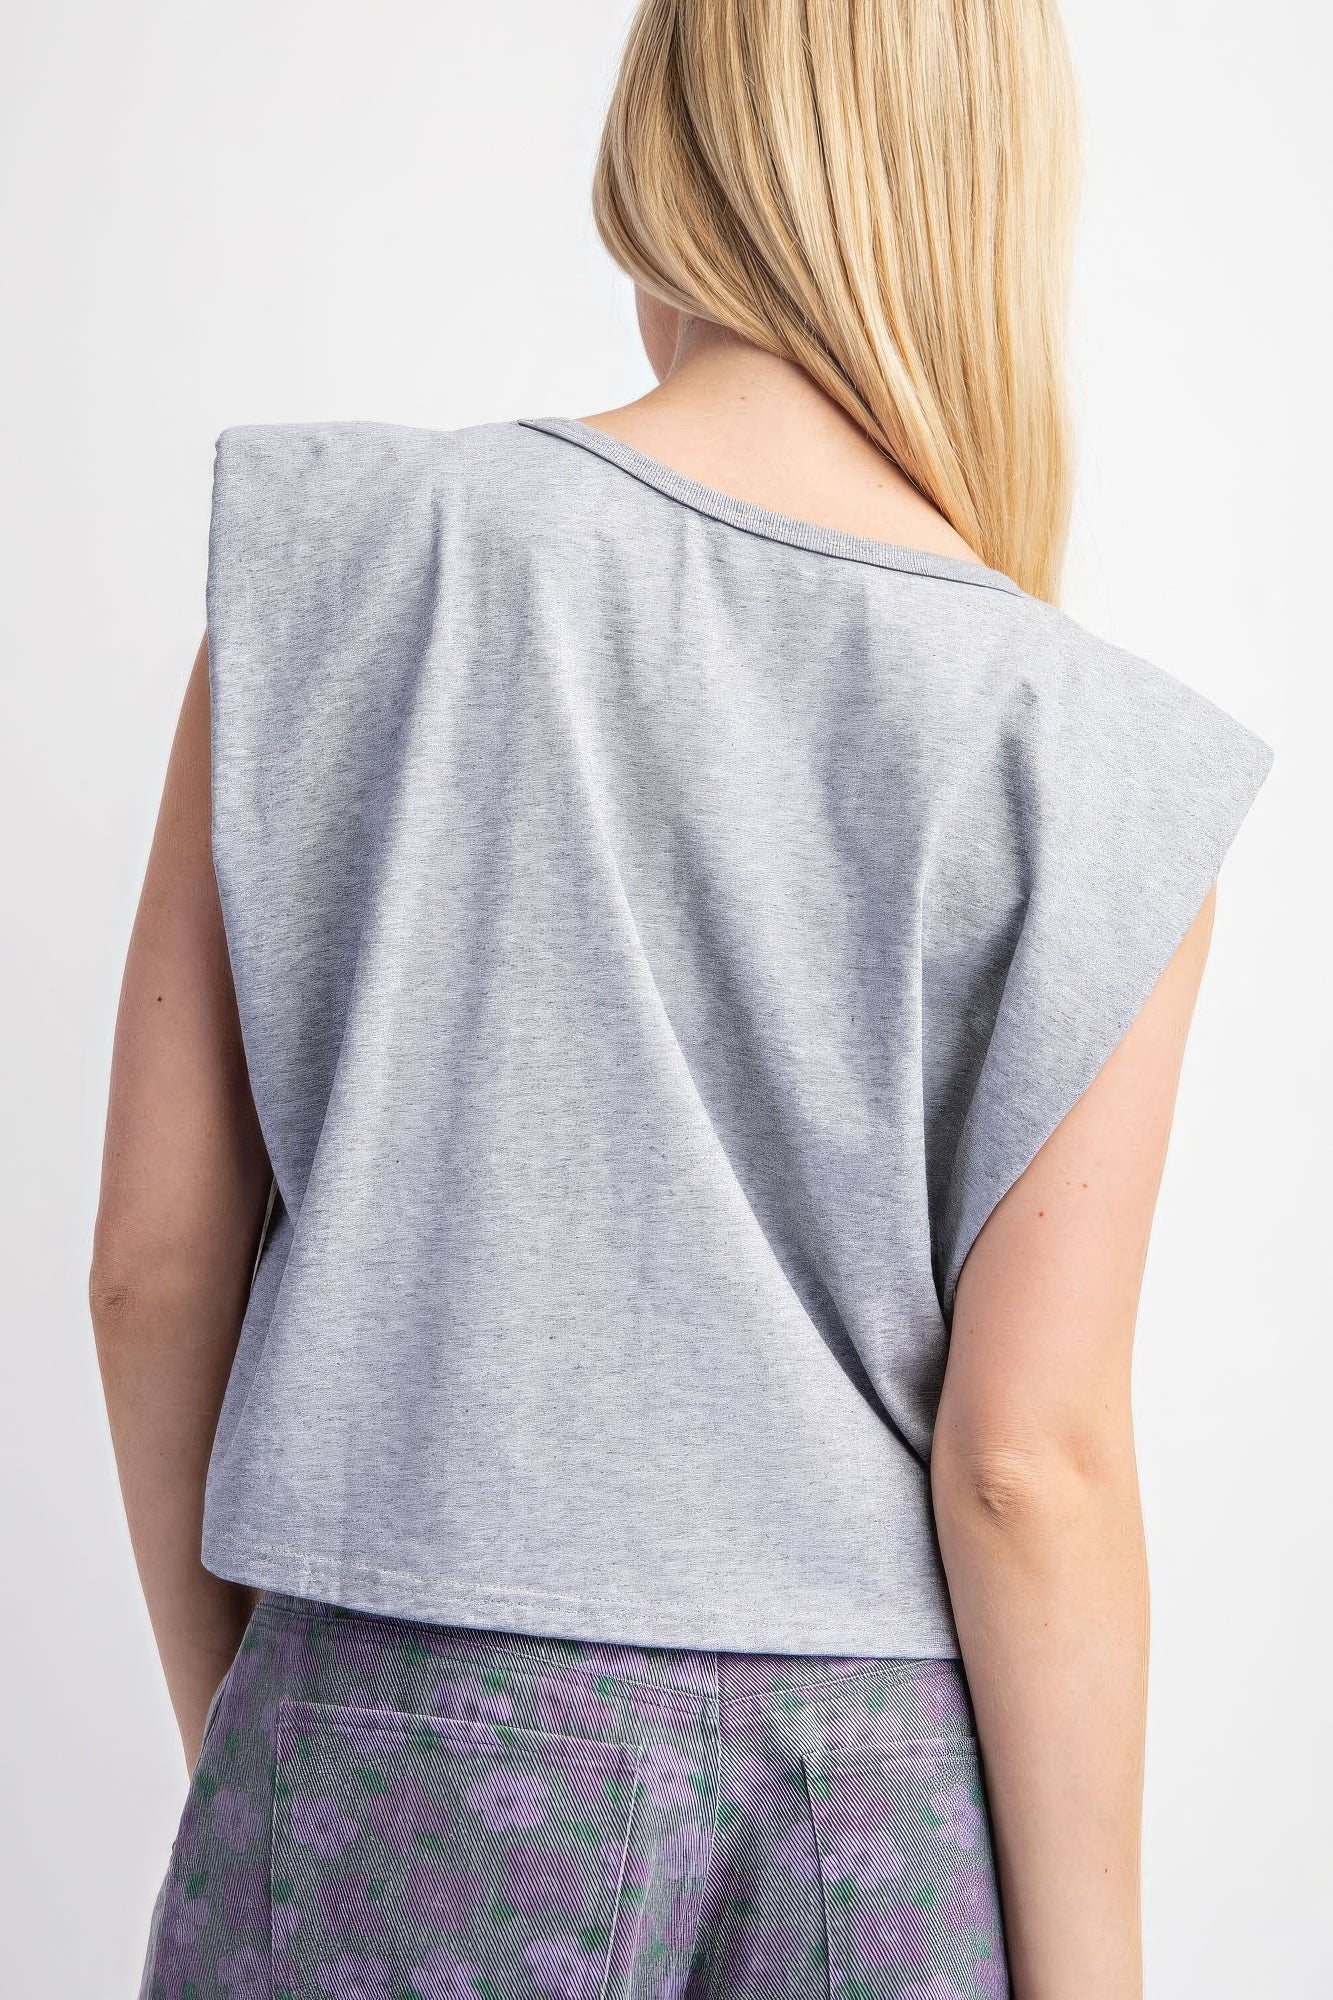 THE ROCHELLE Sleeveless Crop Top With Shoulder Pads